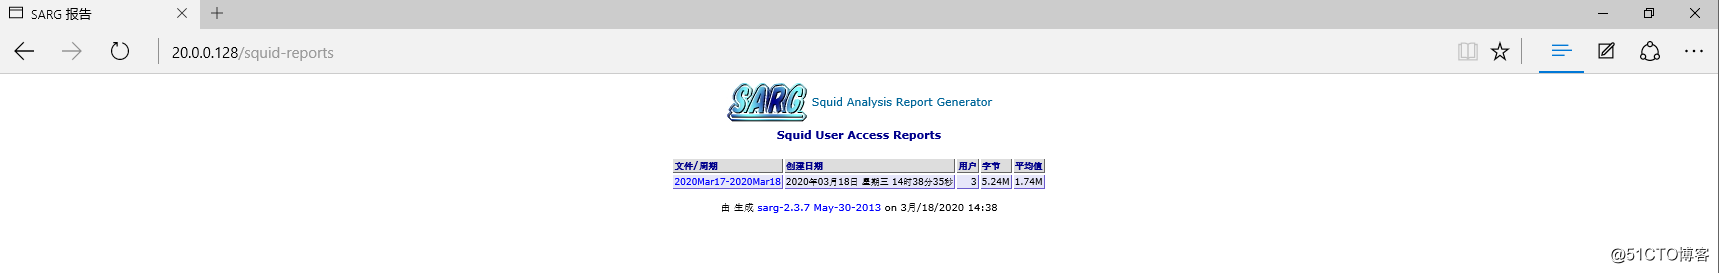 Practice makes perfect --squid of ACL access control and log analysis using the verification sarg